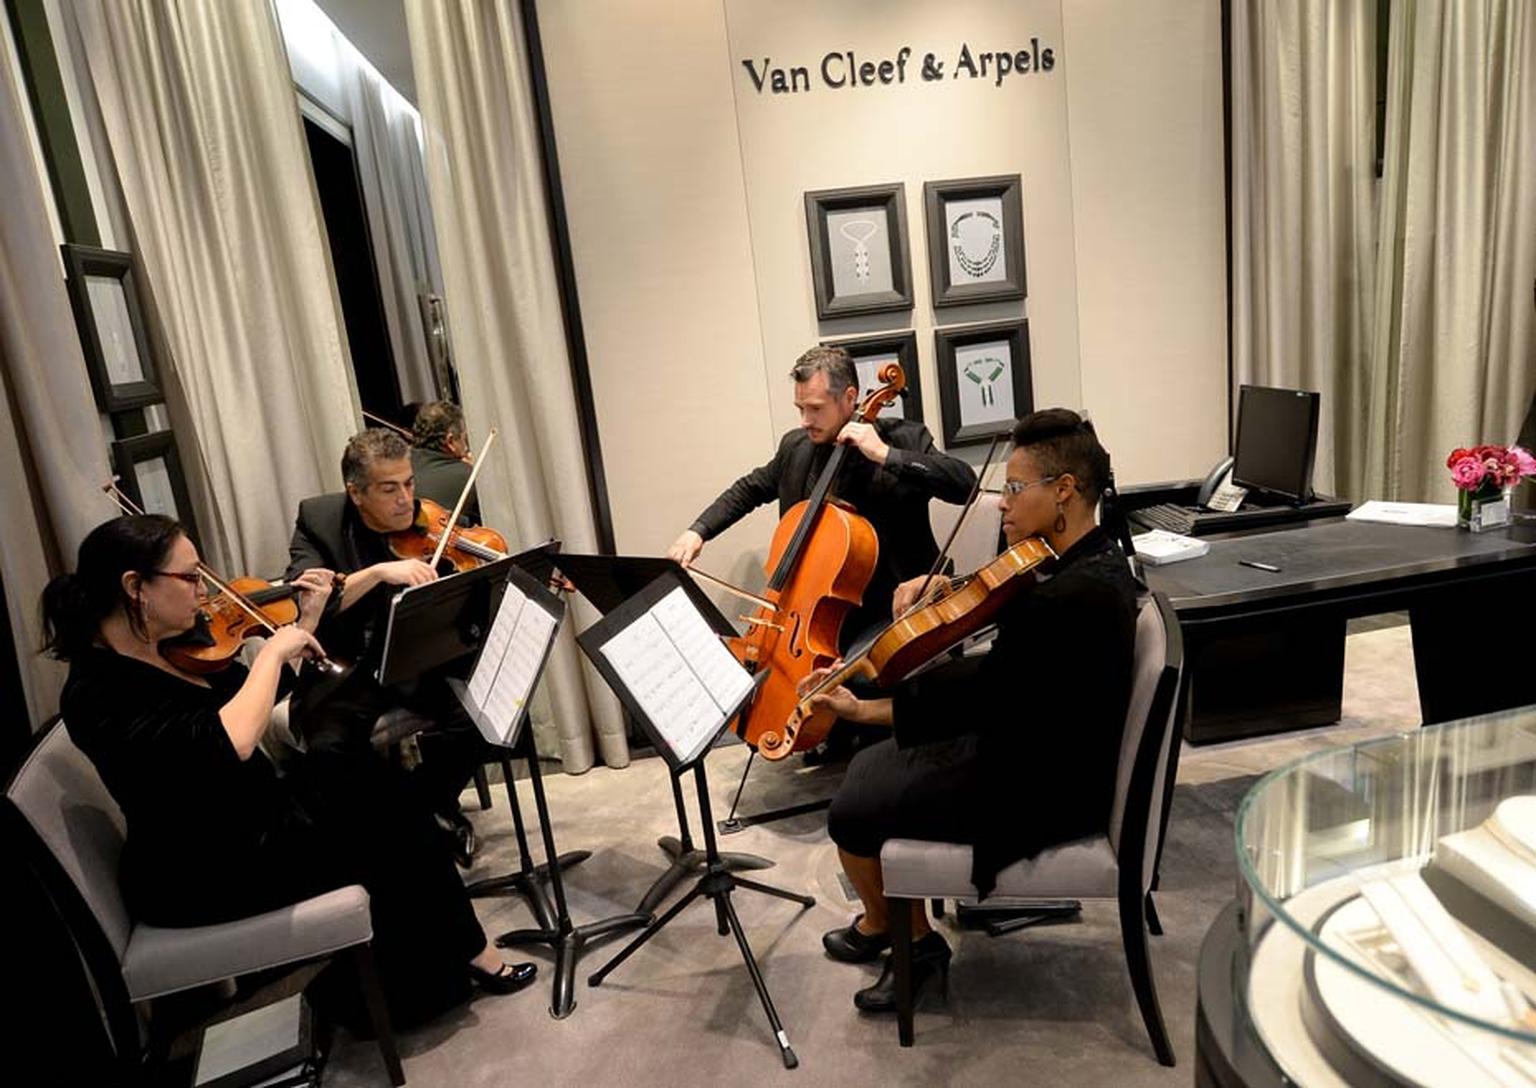 VIP guests enjoyed champagne and a string quartet performance